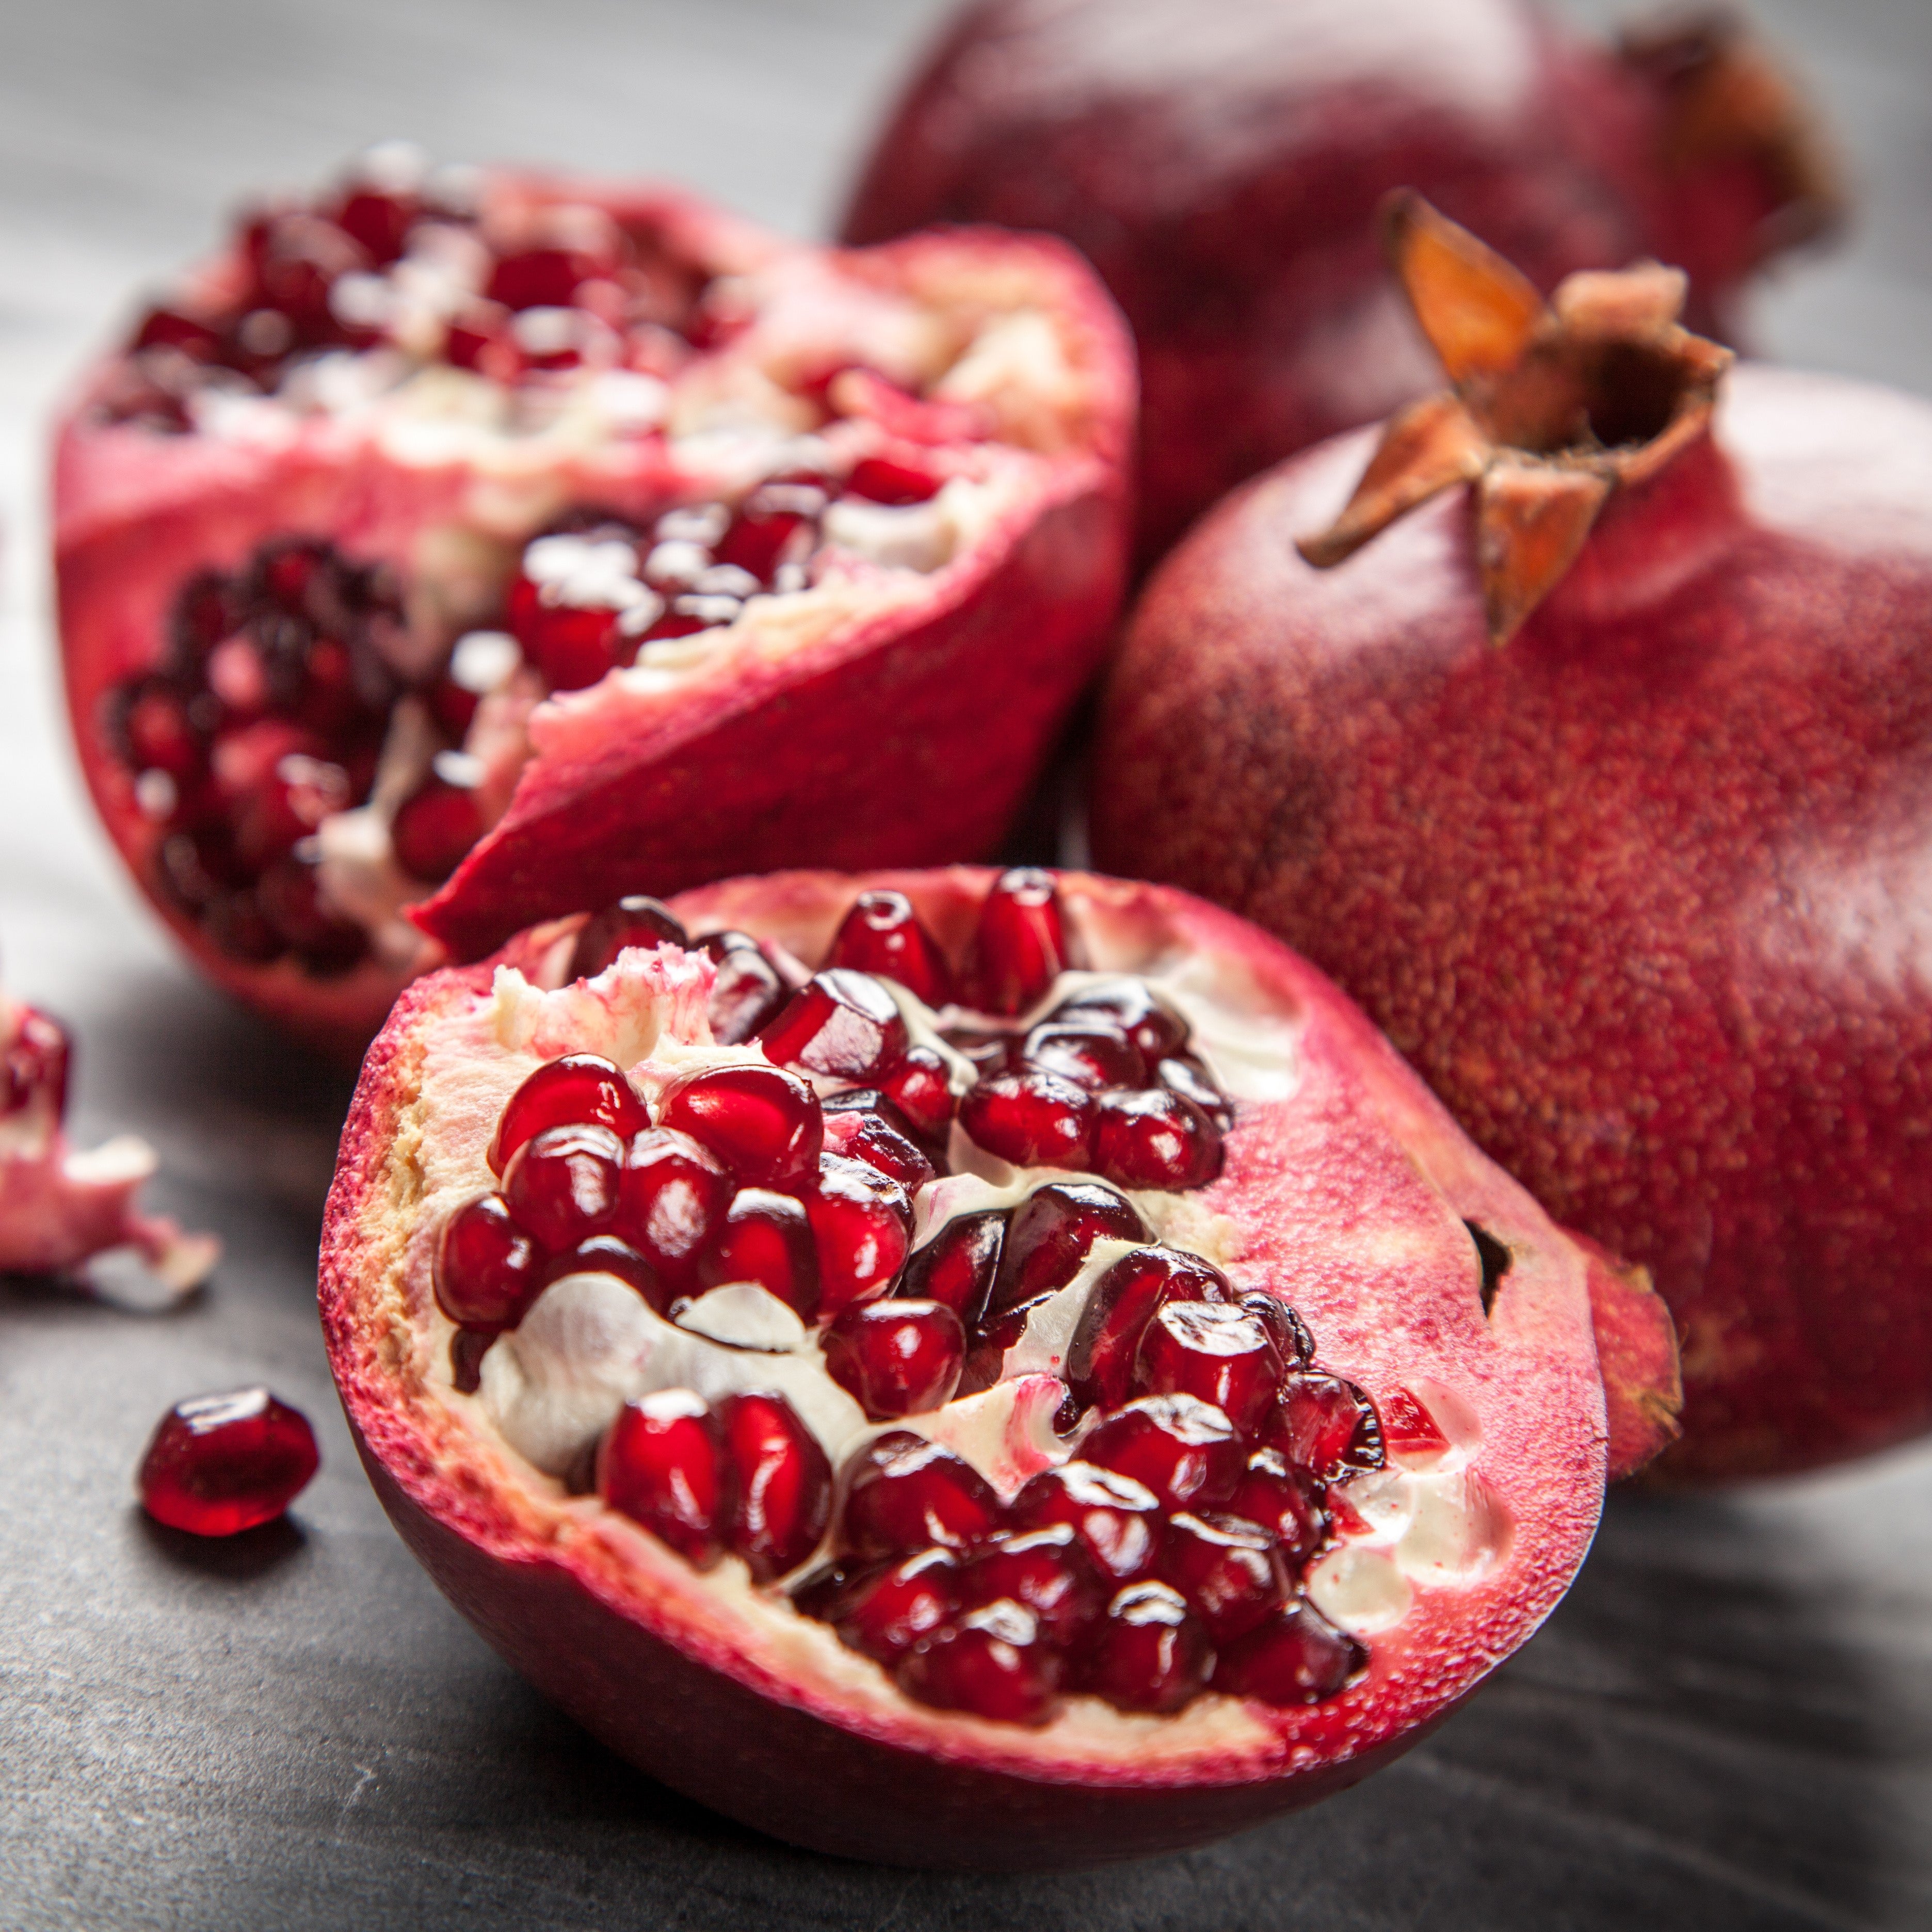 Pomegranate Seed Essential Oil